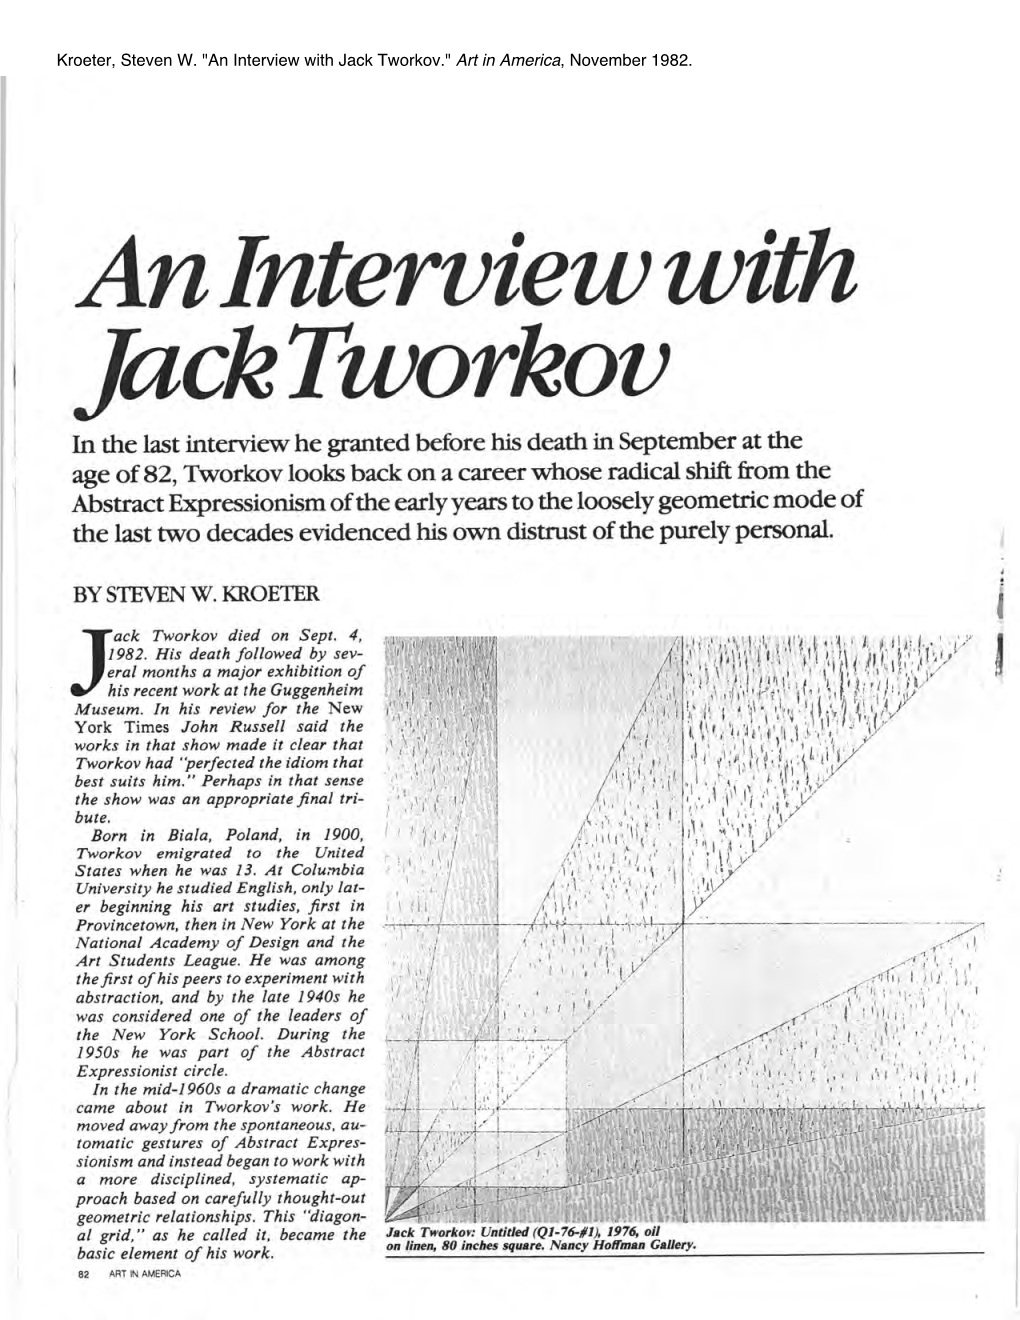 An Interview with Jack Tworkov." Art in America, November 1982